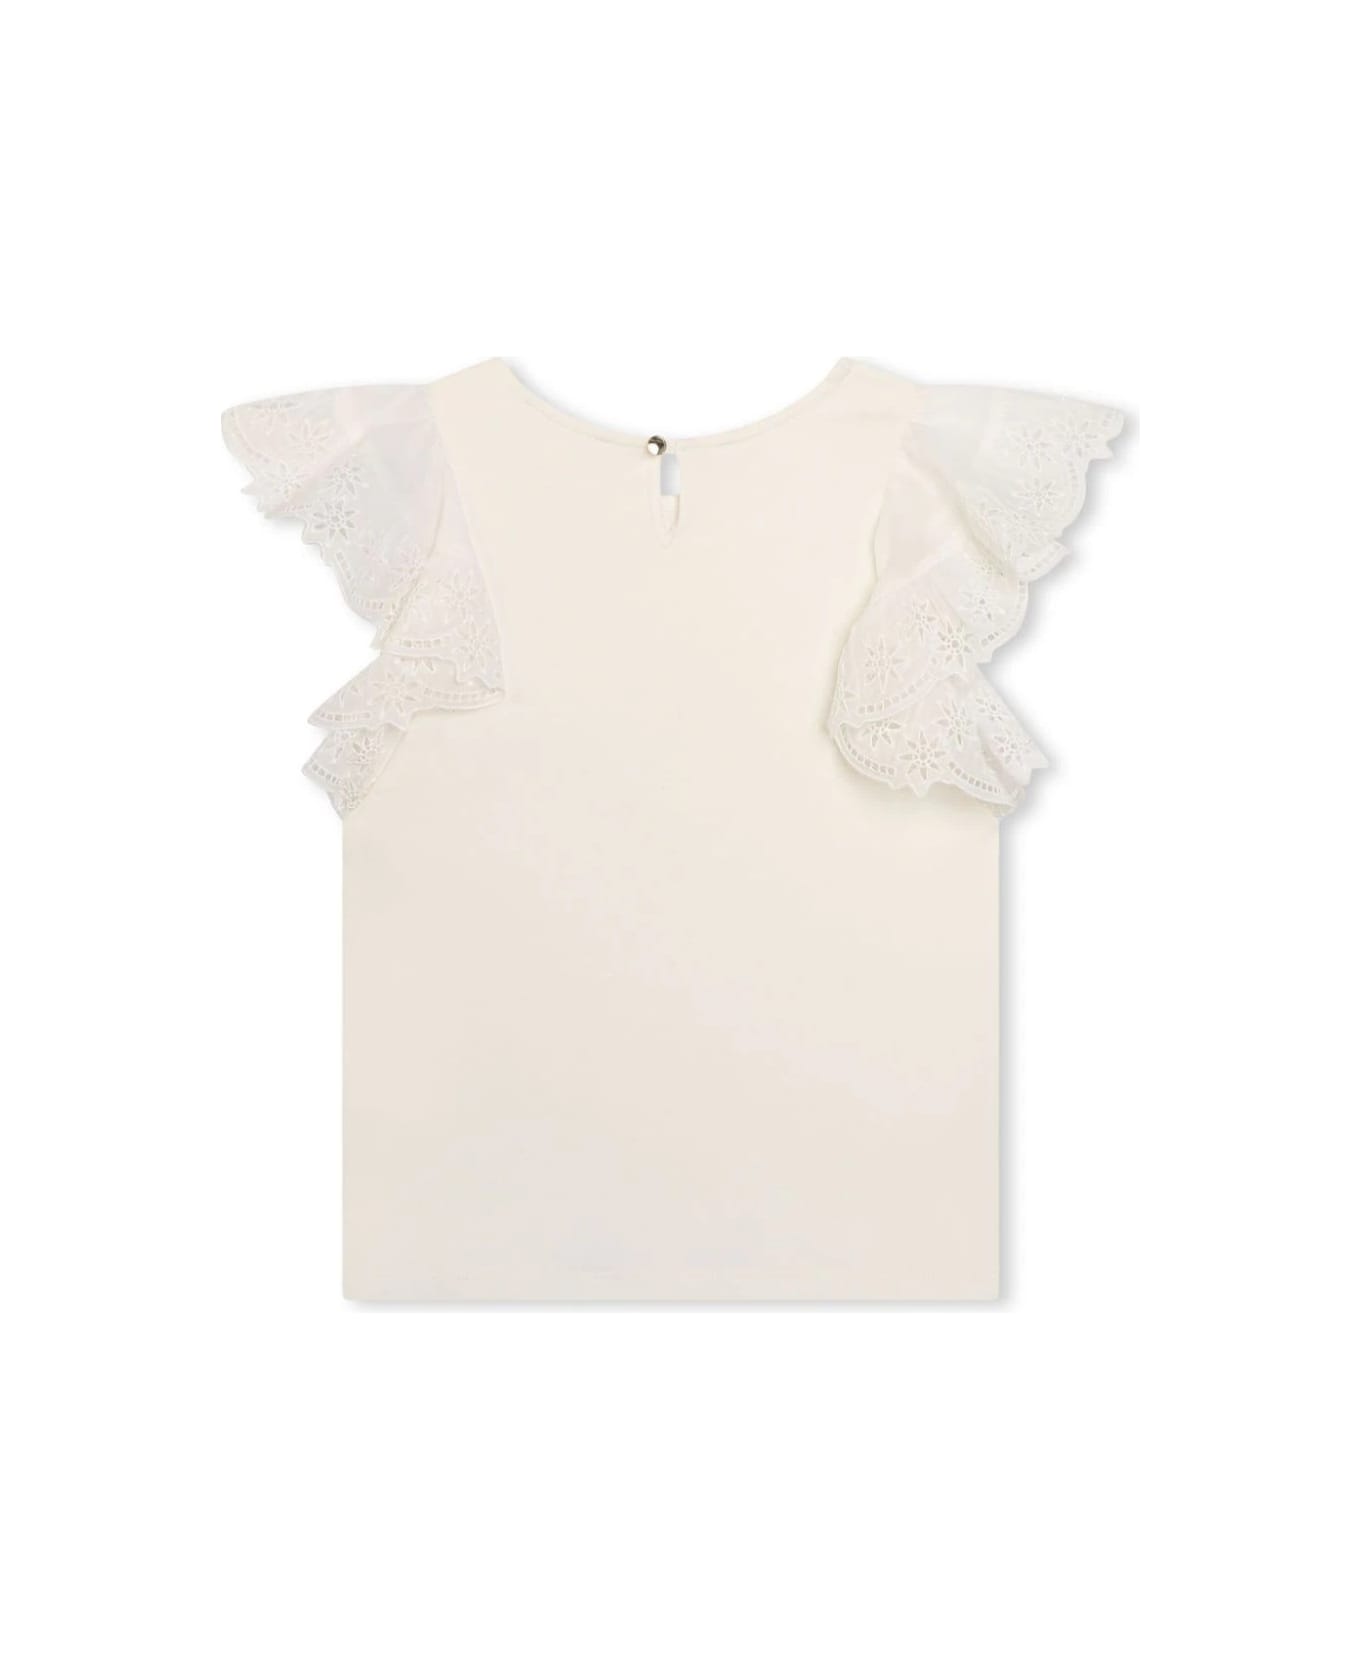 Chloé White Top With Embroidered Ruffles - White トップス